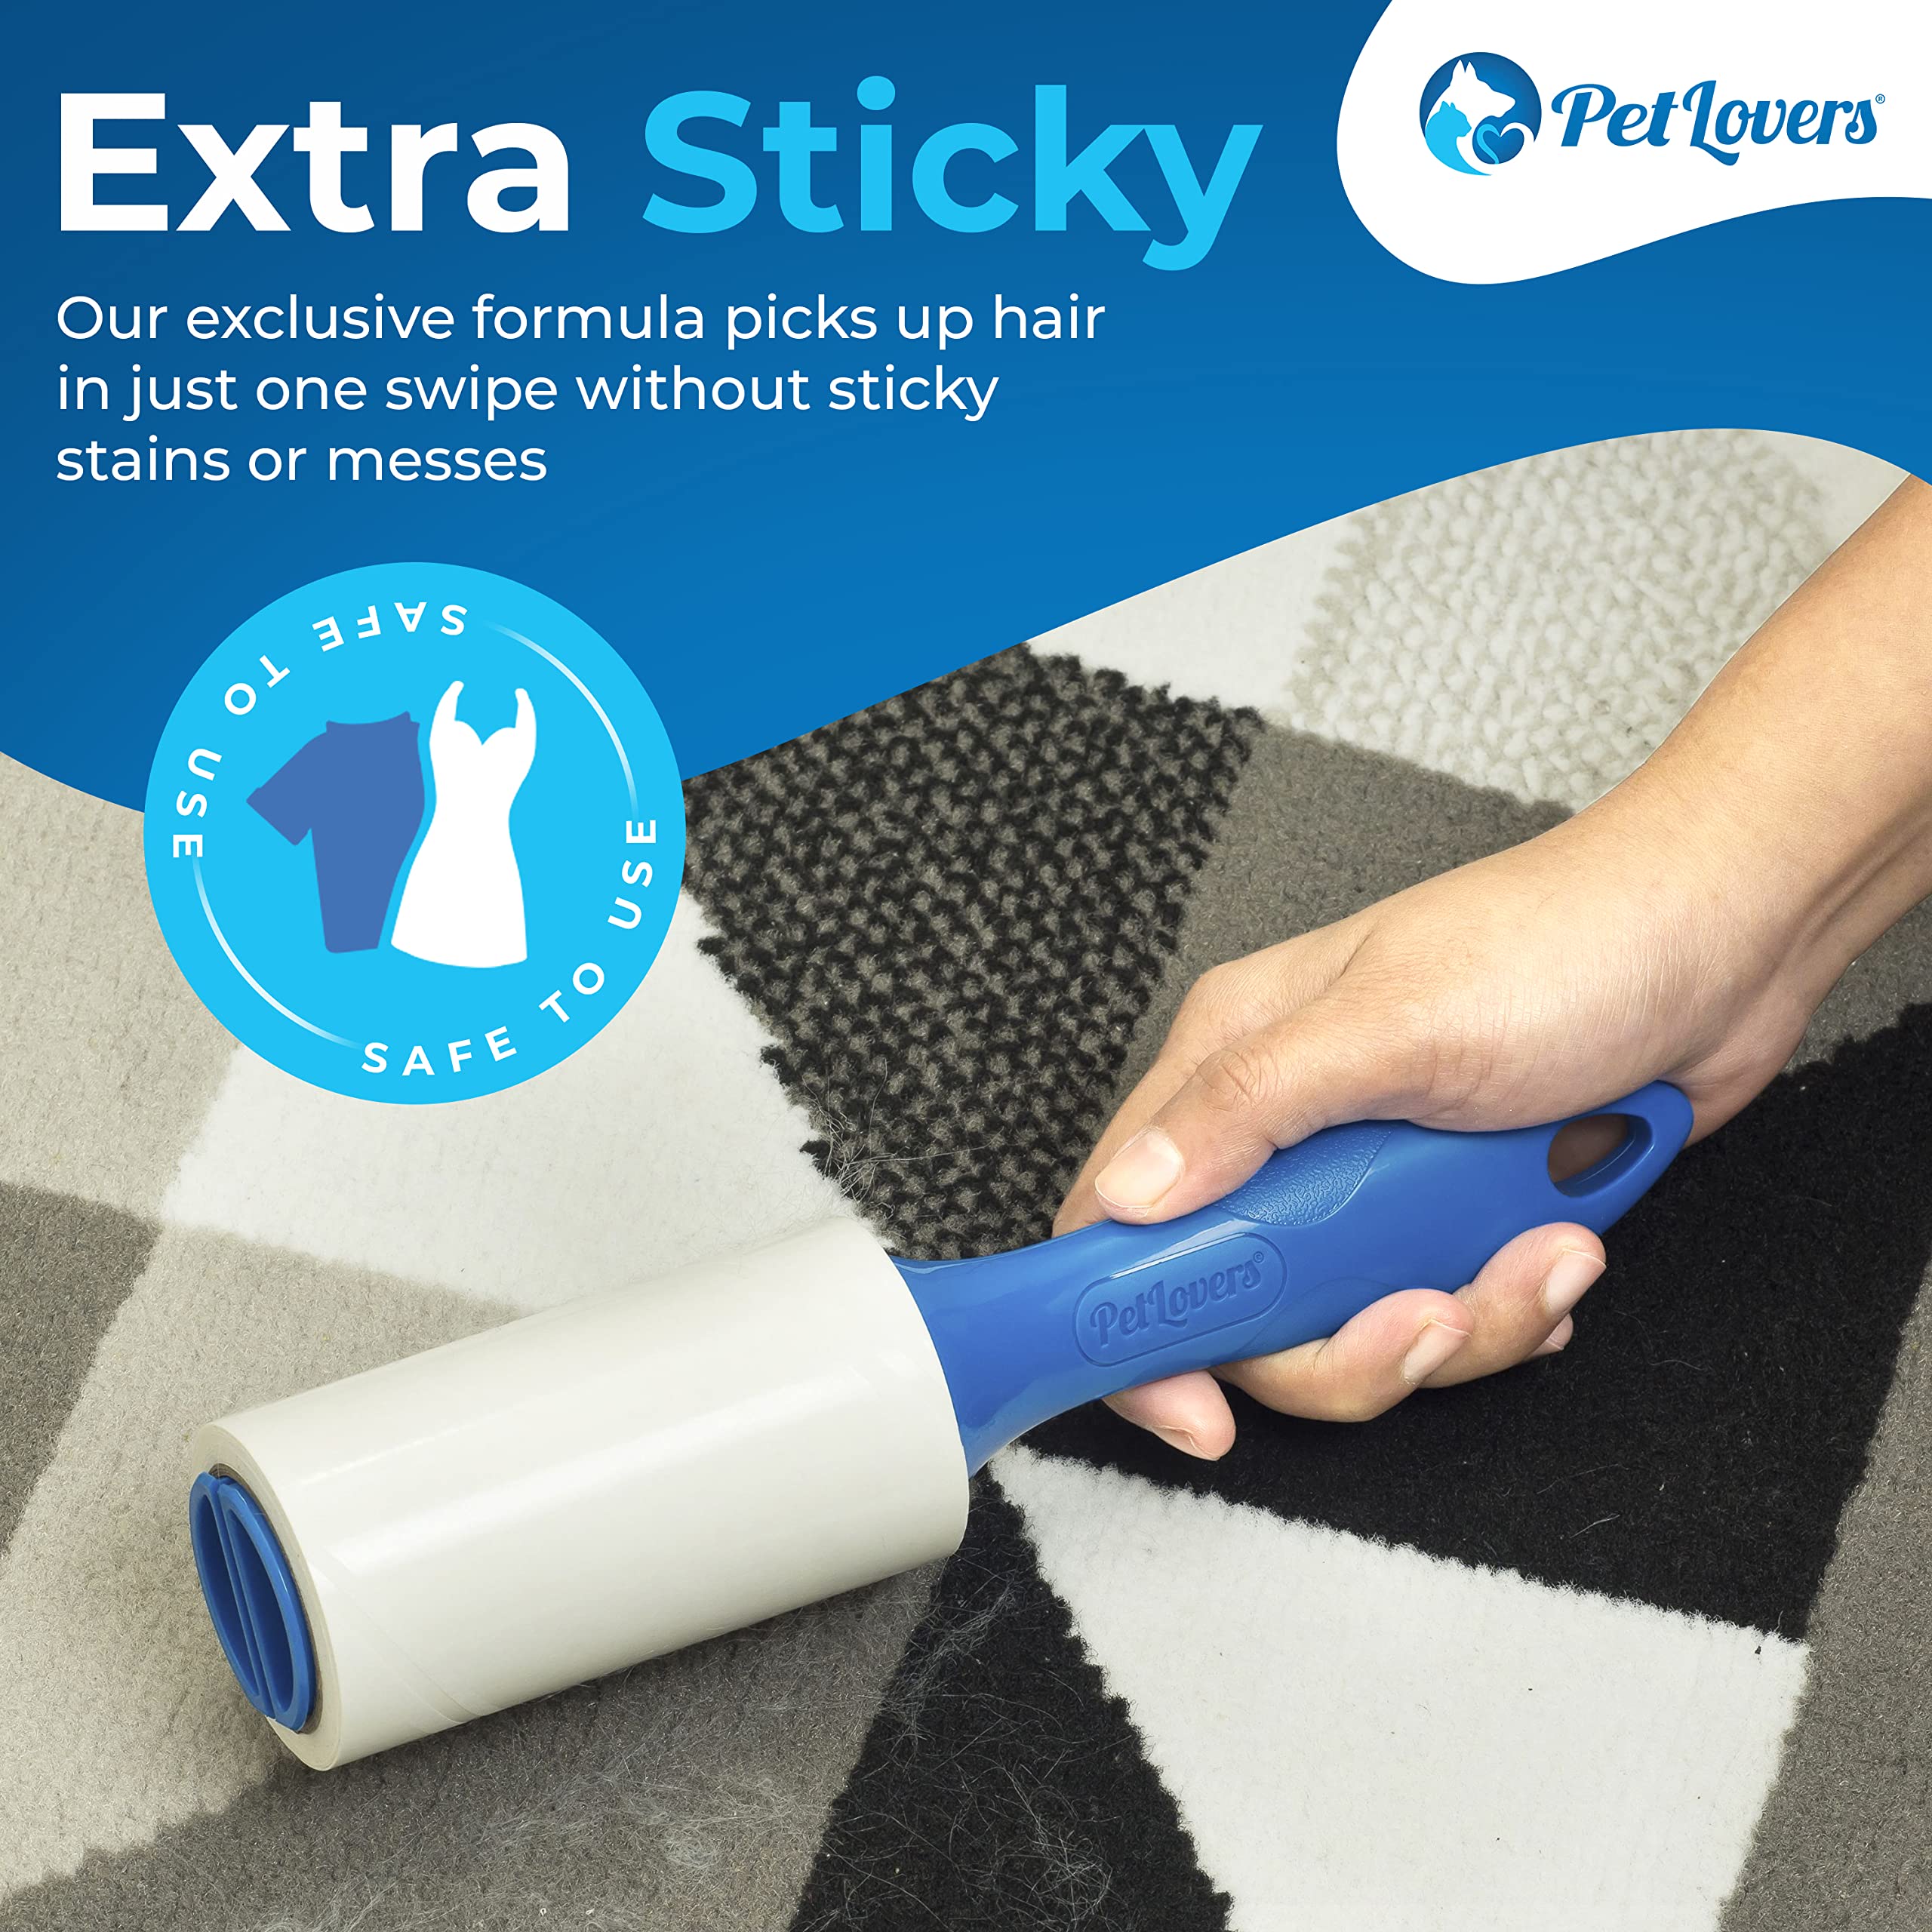 Lint roller or adhesive tape – Ideal for removing any loose fur or lint from the plush's surface.
Plush-safe stain remover – If the plush has stubborn stains, use a plush-safe stain remover to target and remove the stains without causing damage.